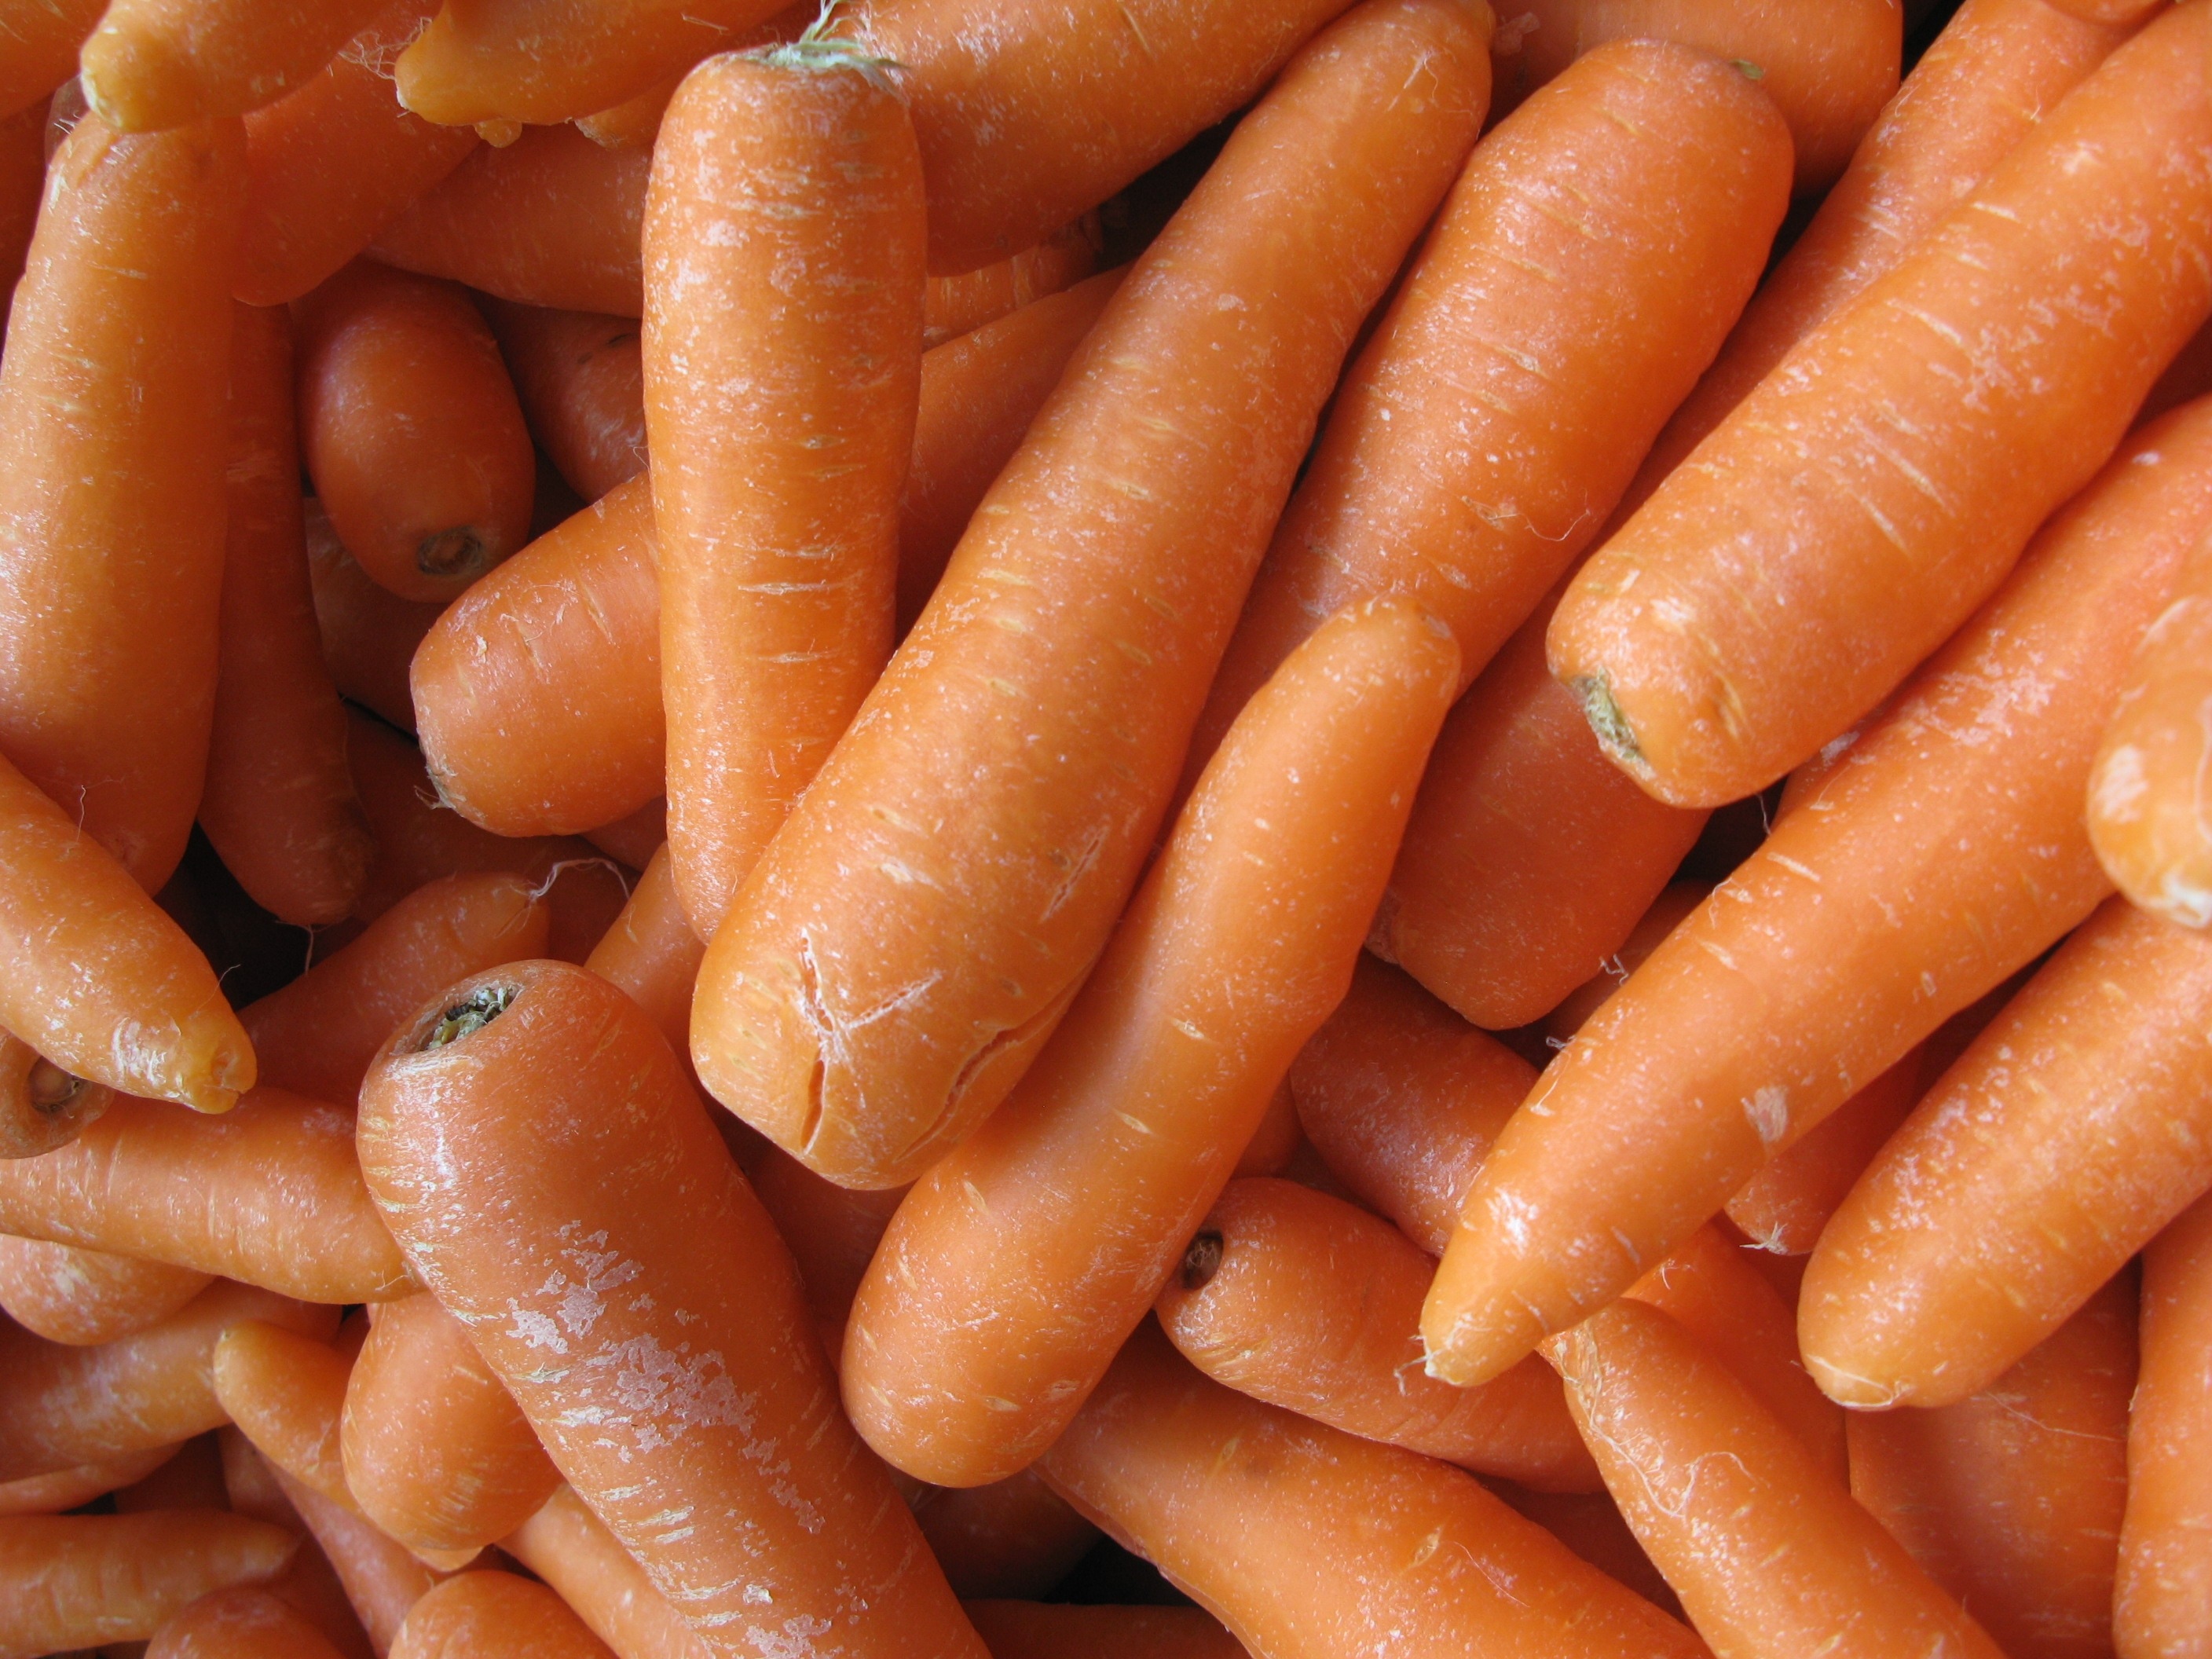 pile of carrots